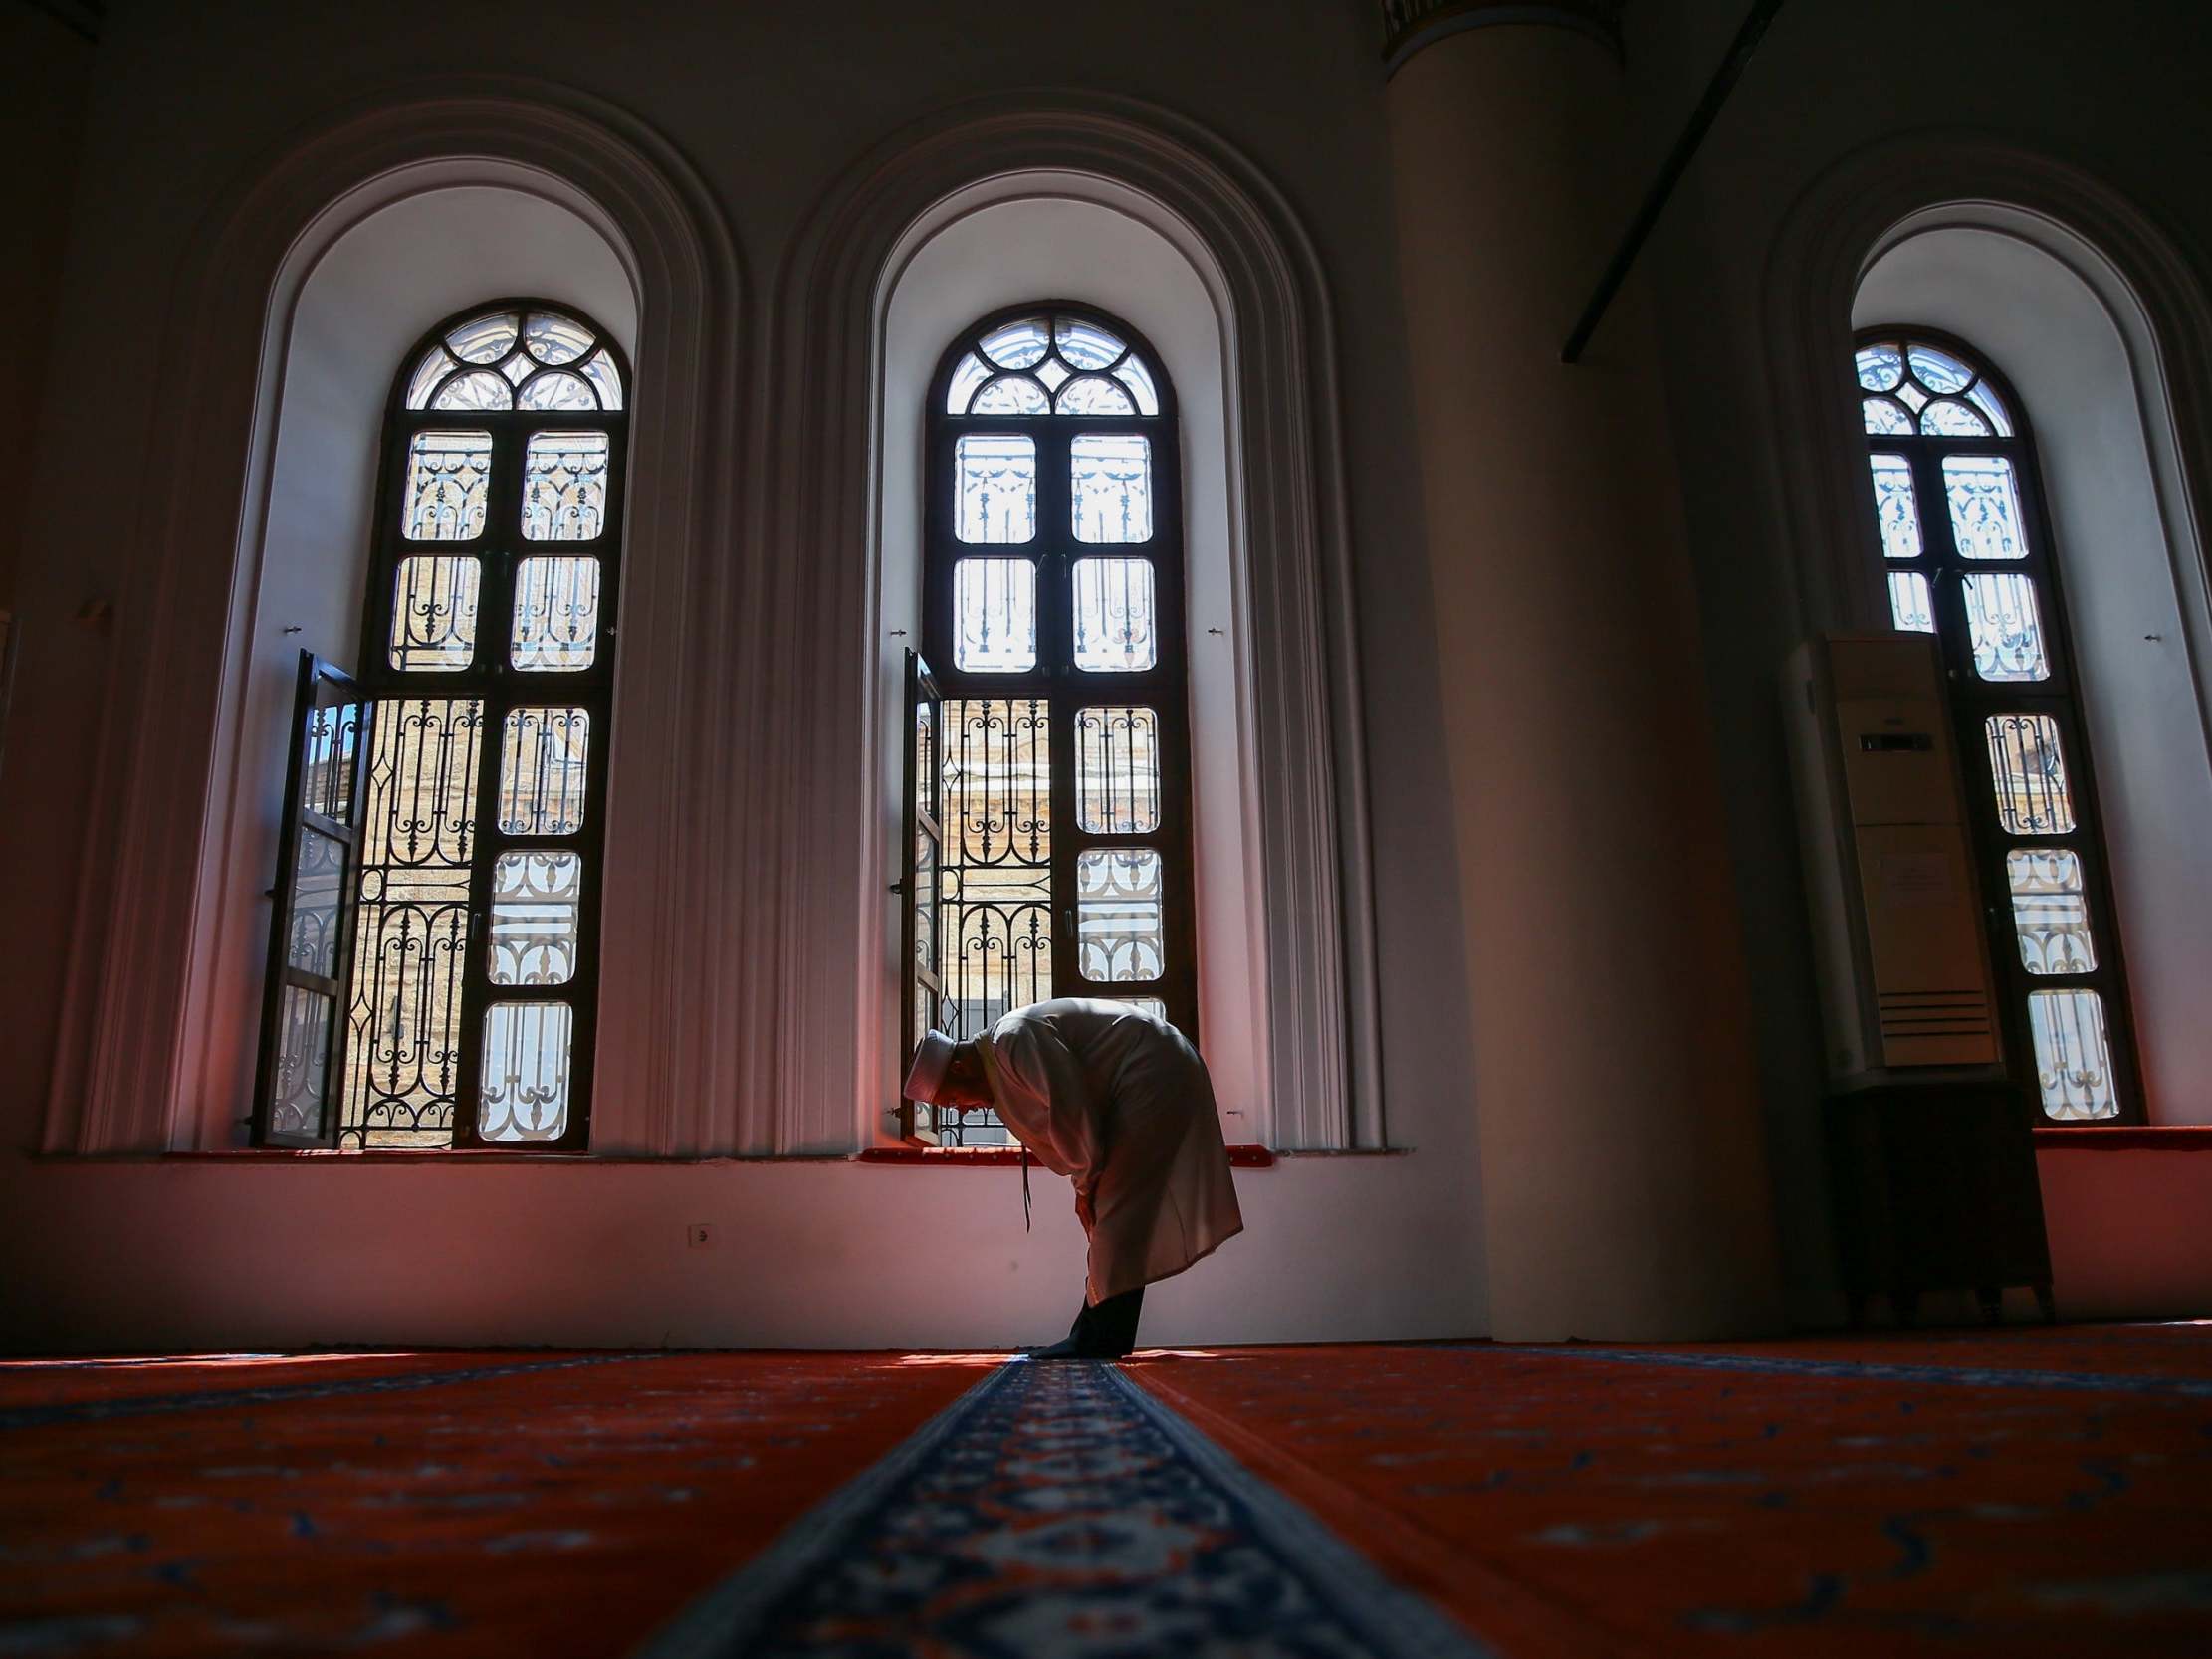 Mosques in Izmir will reopen their doors to worshippers for Friday prayer on May 29